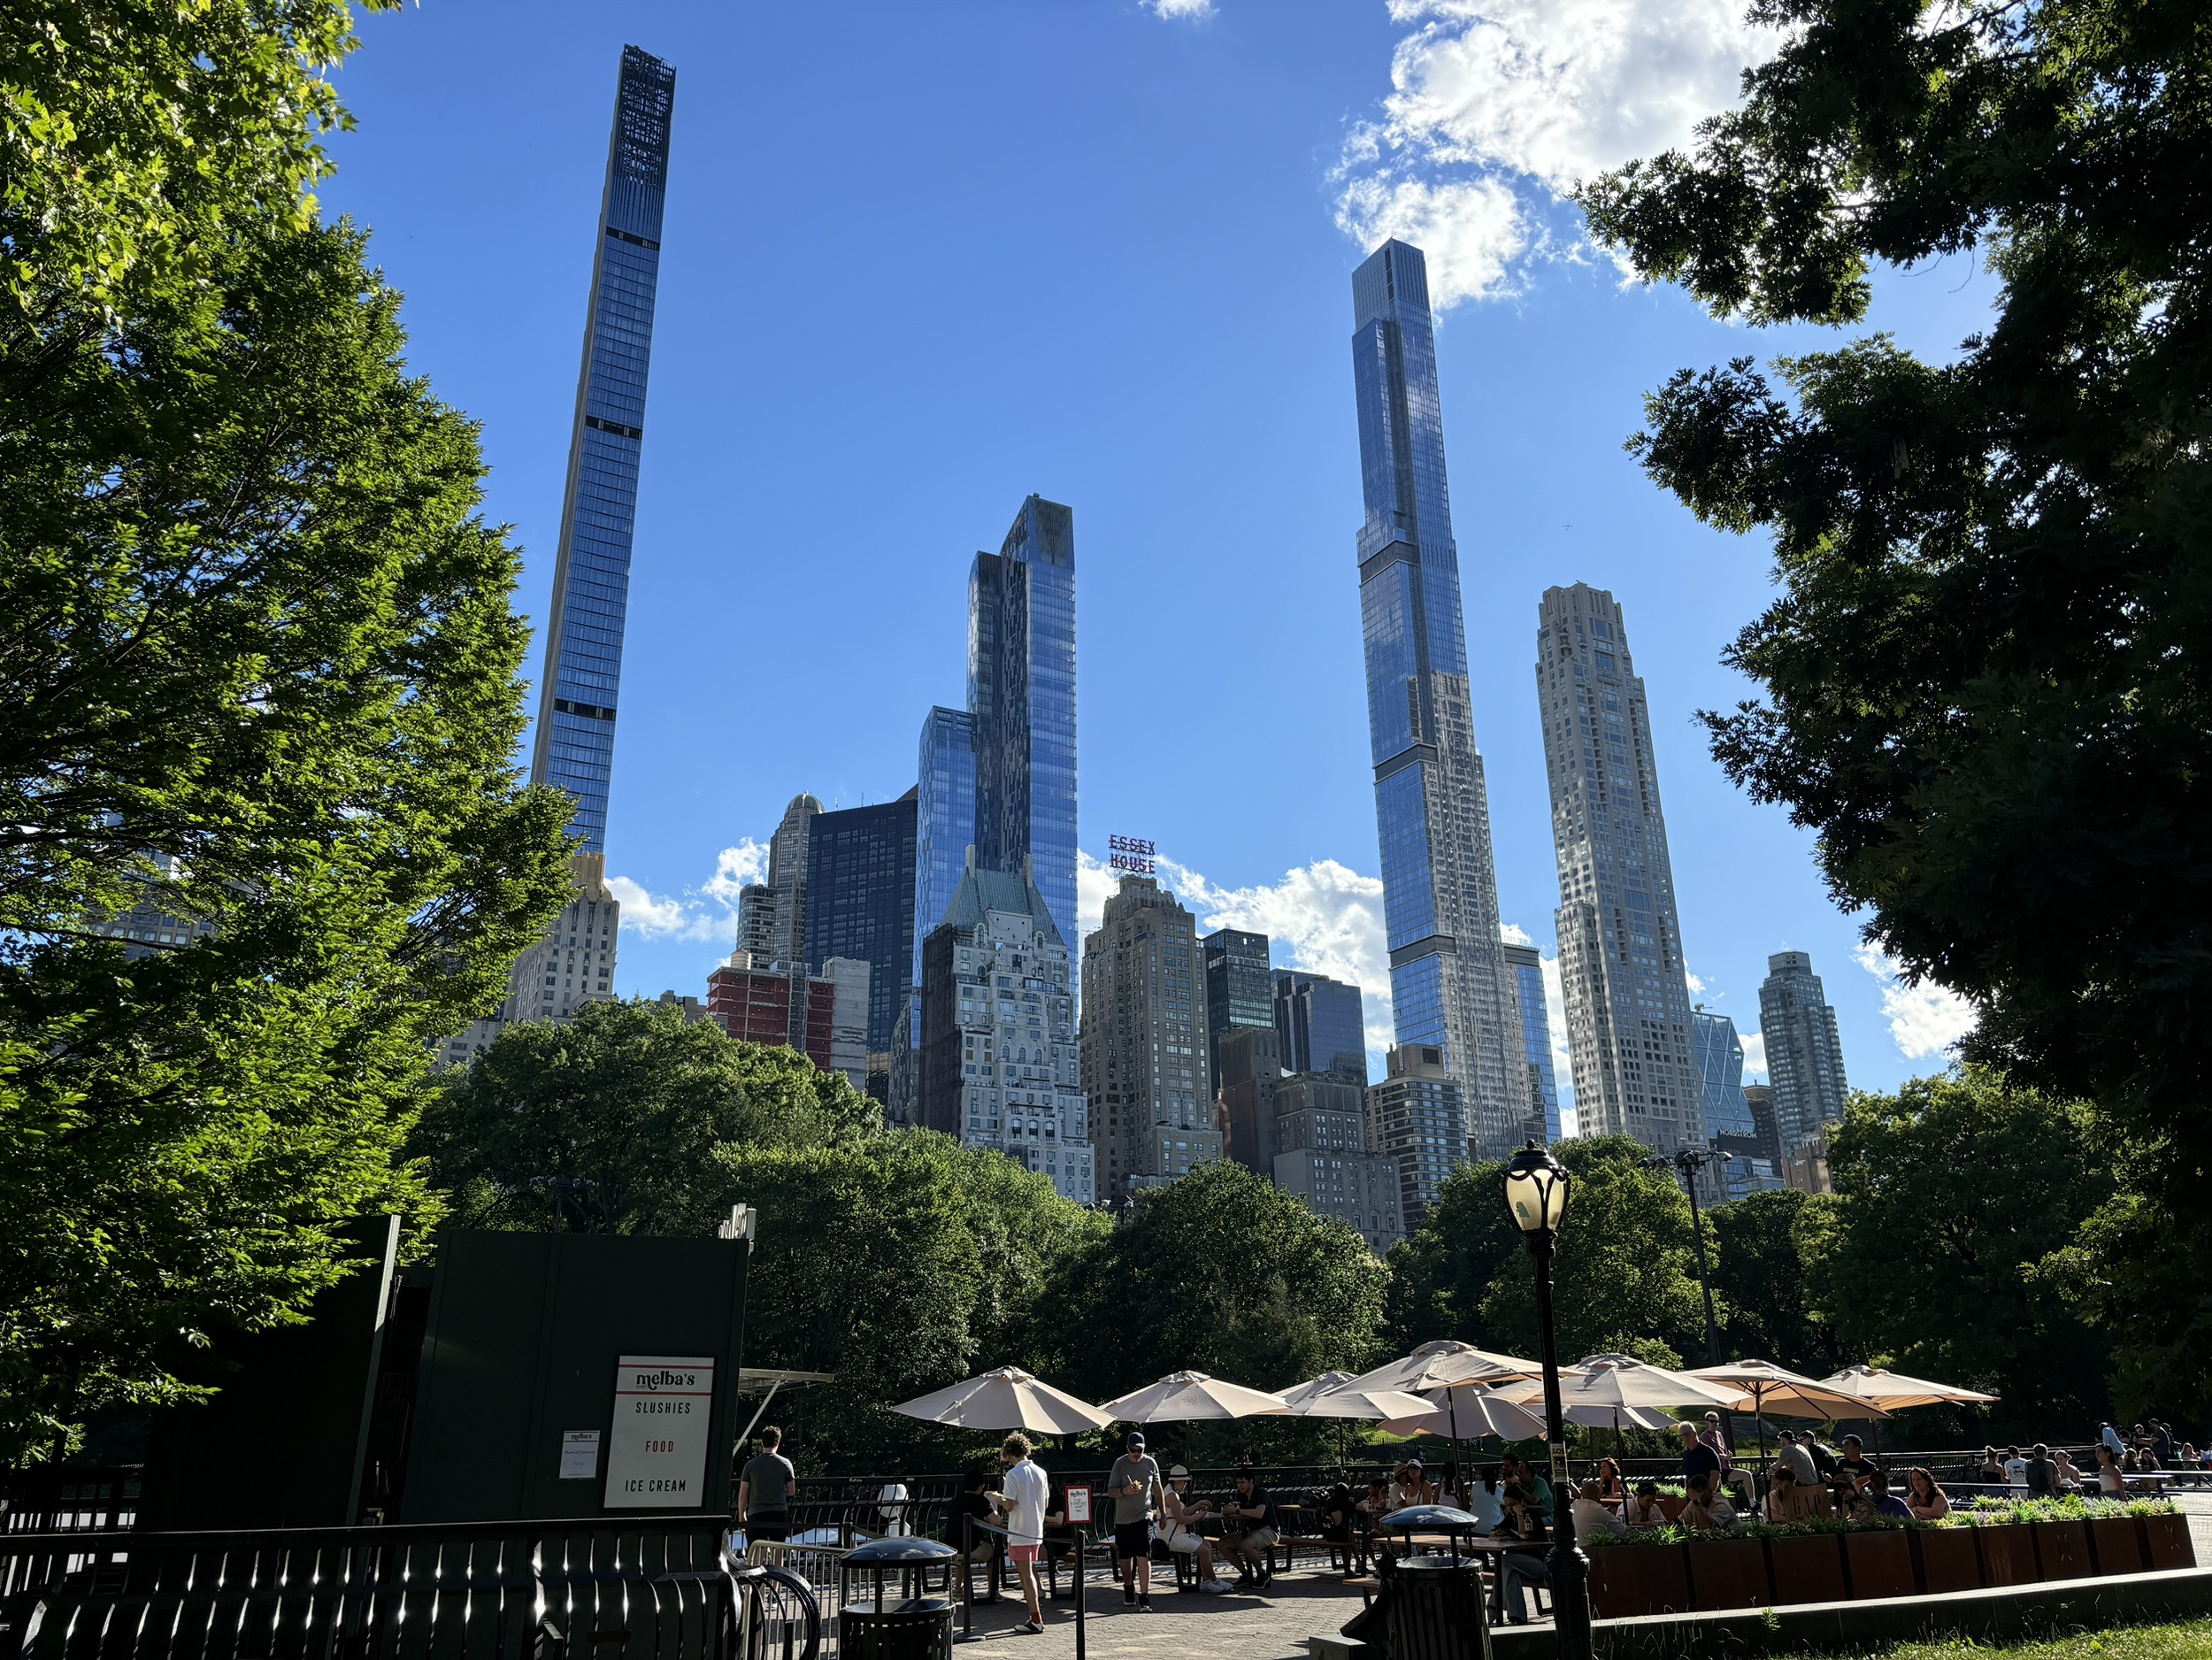 A view of the NYC Skyline above the Wollman Ice Rink in Central Park